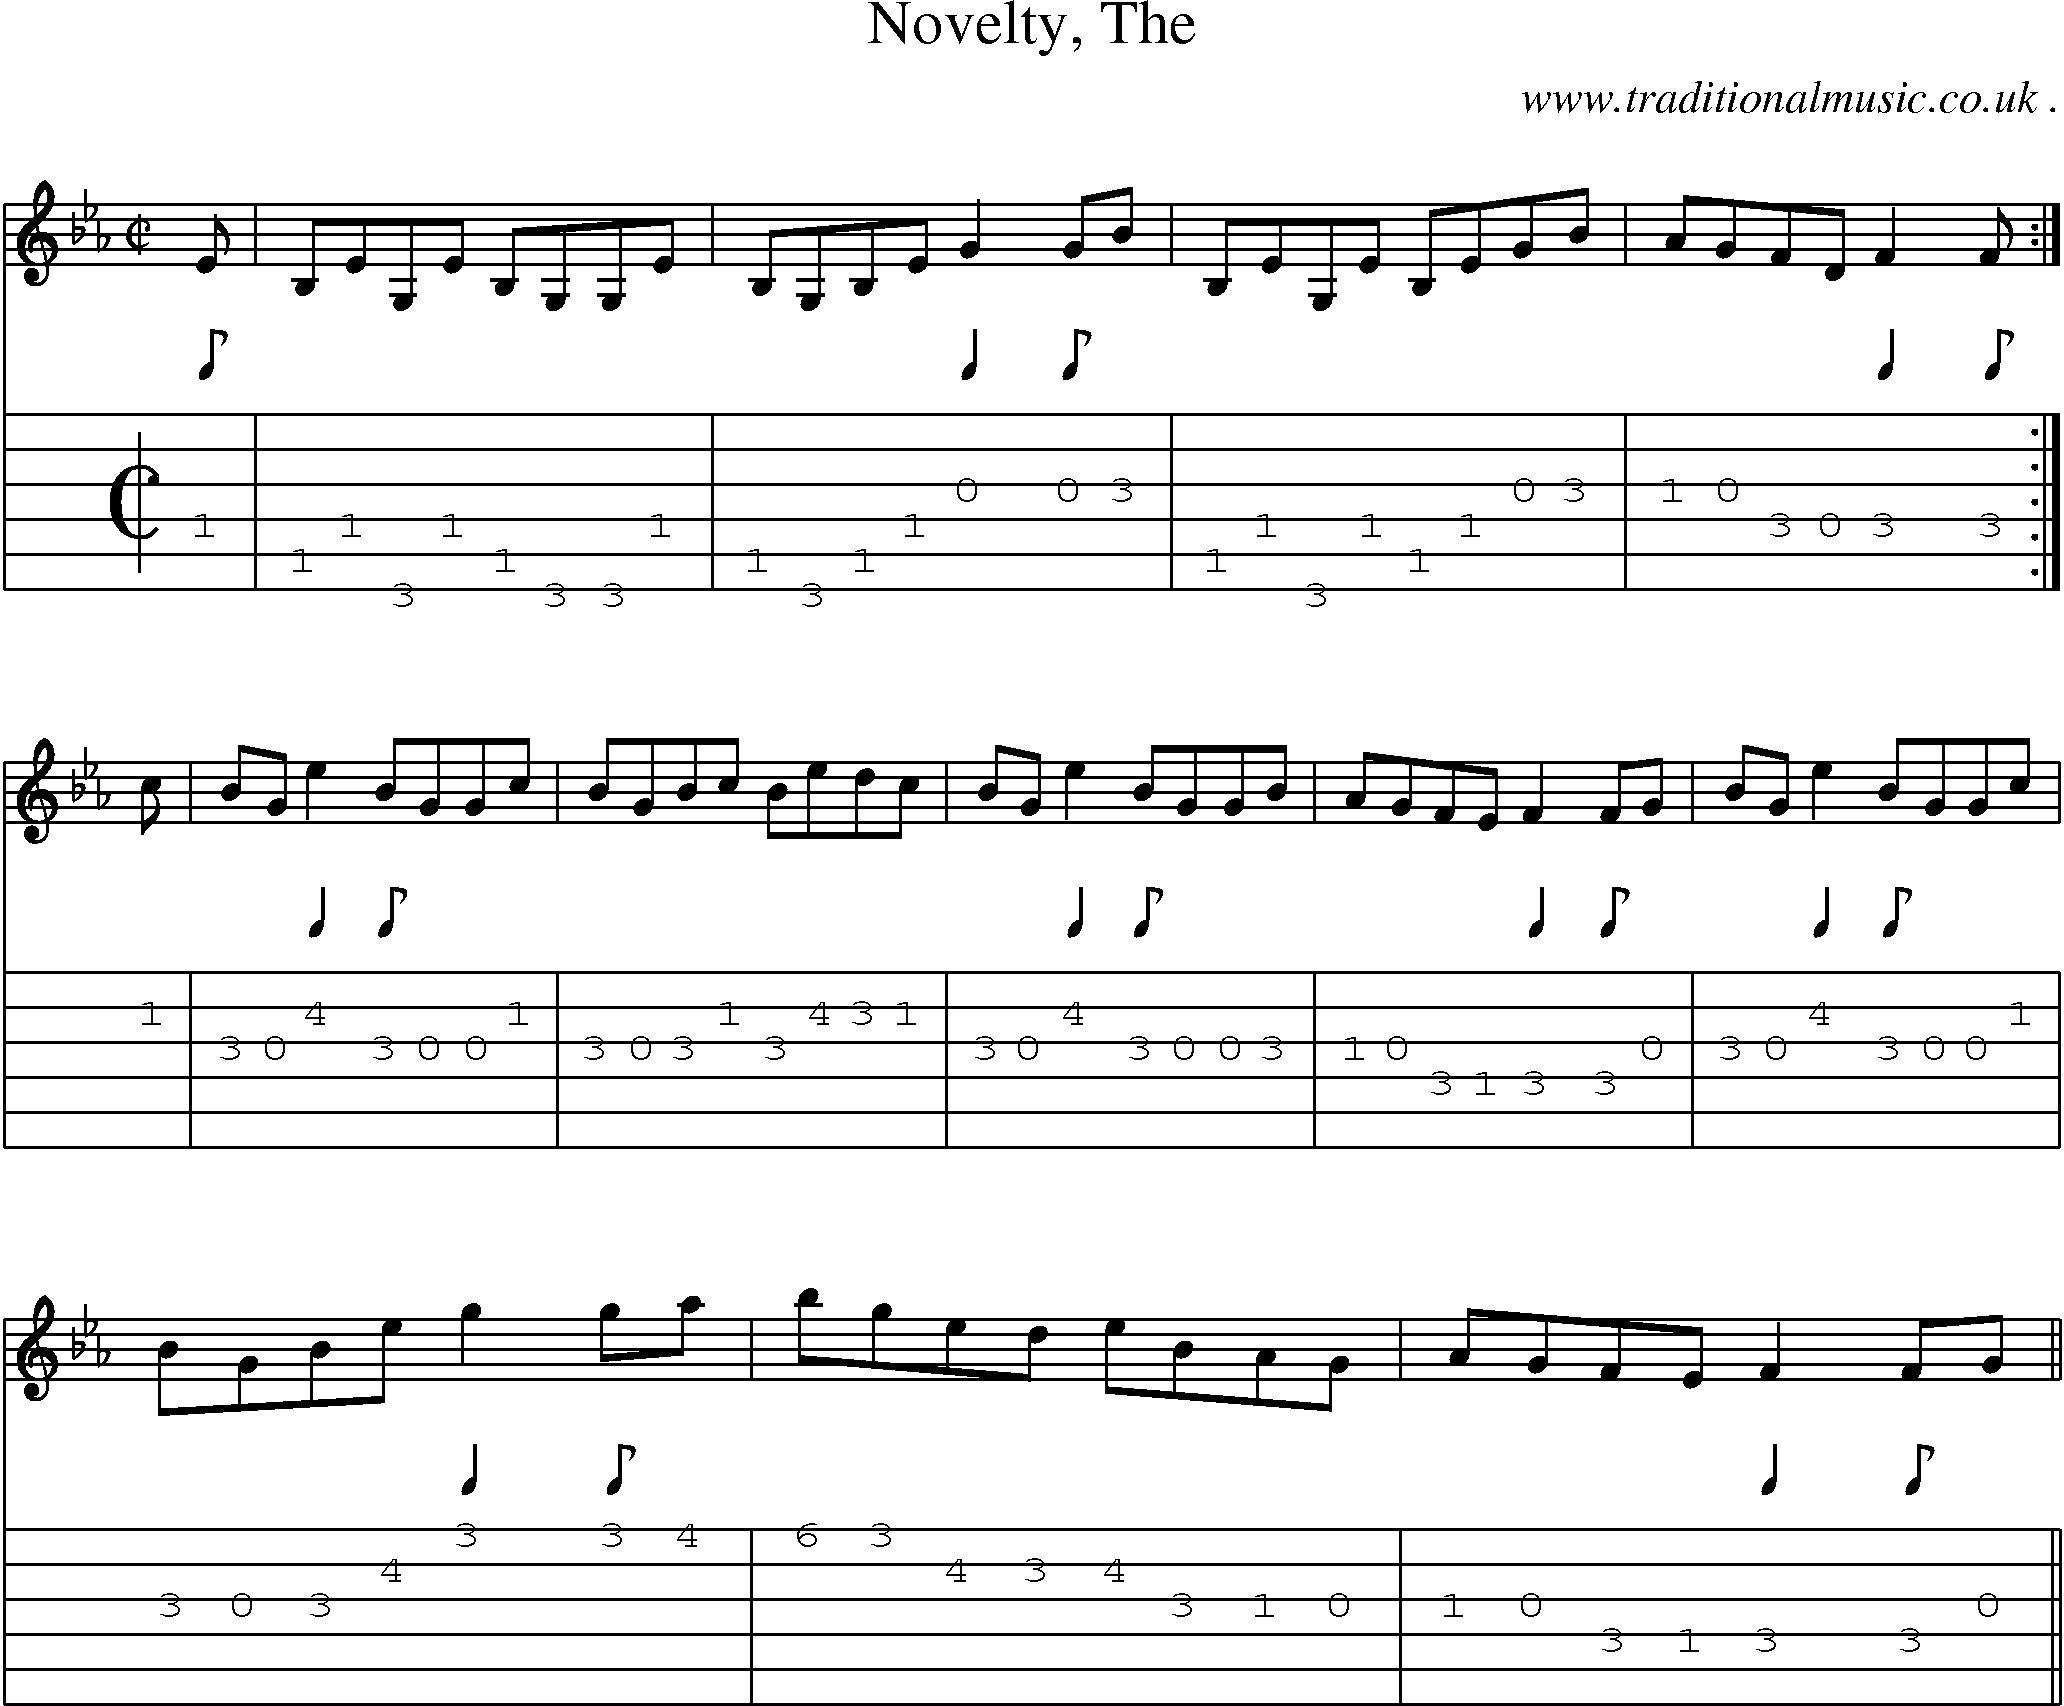 Sheet-music  score, Chords and Guitar Tabs for Novelty The